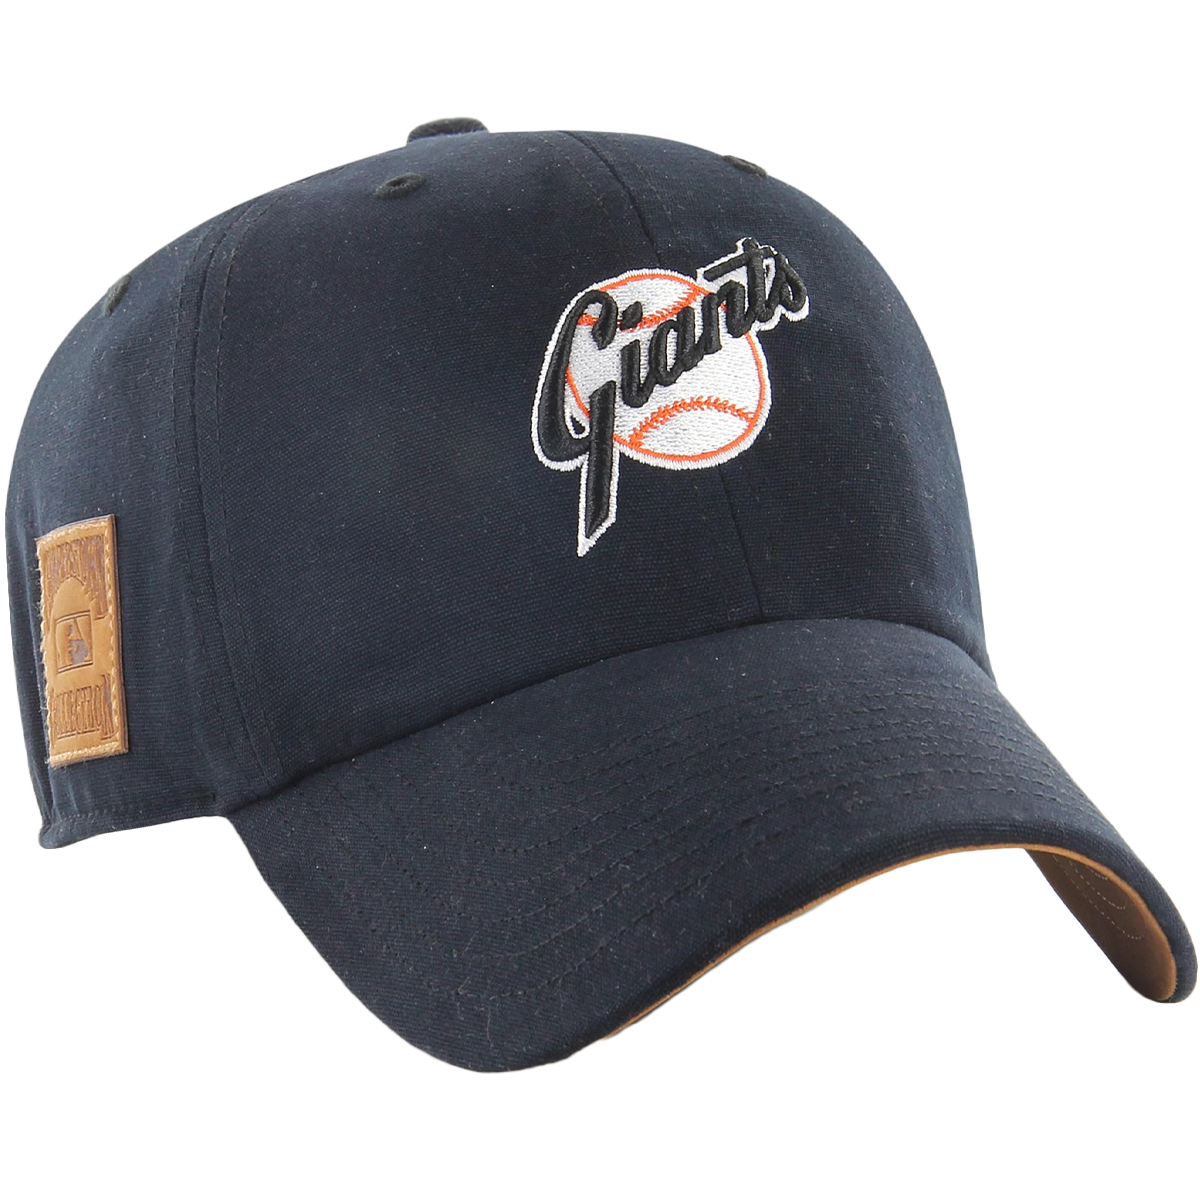 SAN FRANCISCO GIANTS COOPERSTOWN '47 CLEAN UP